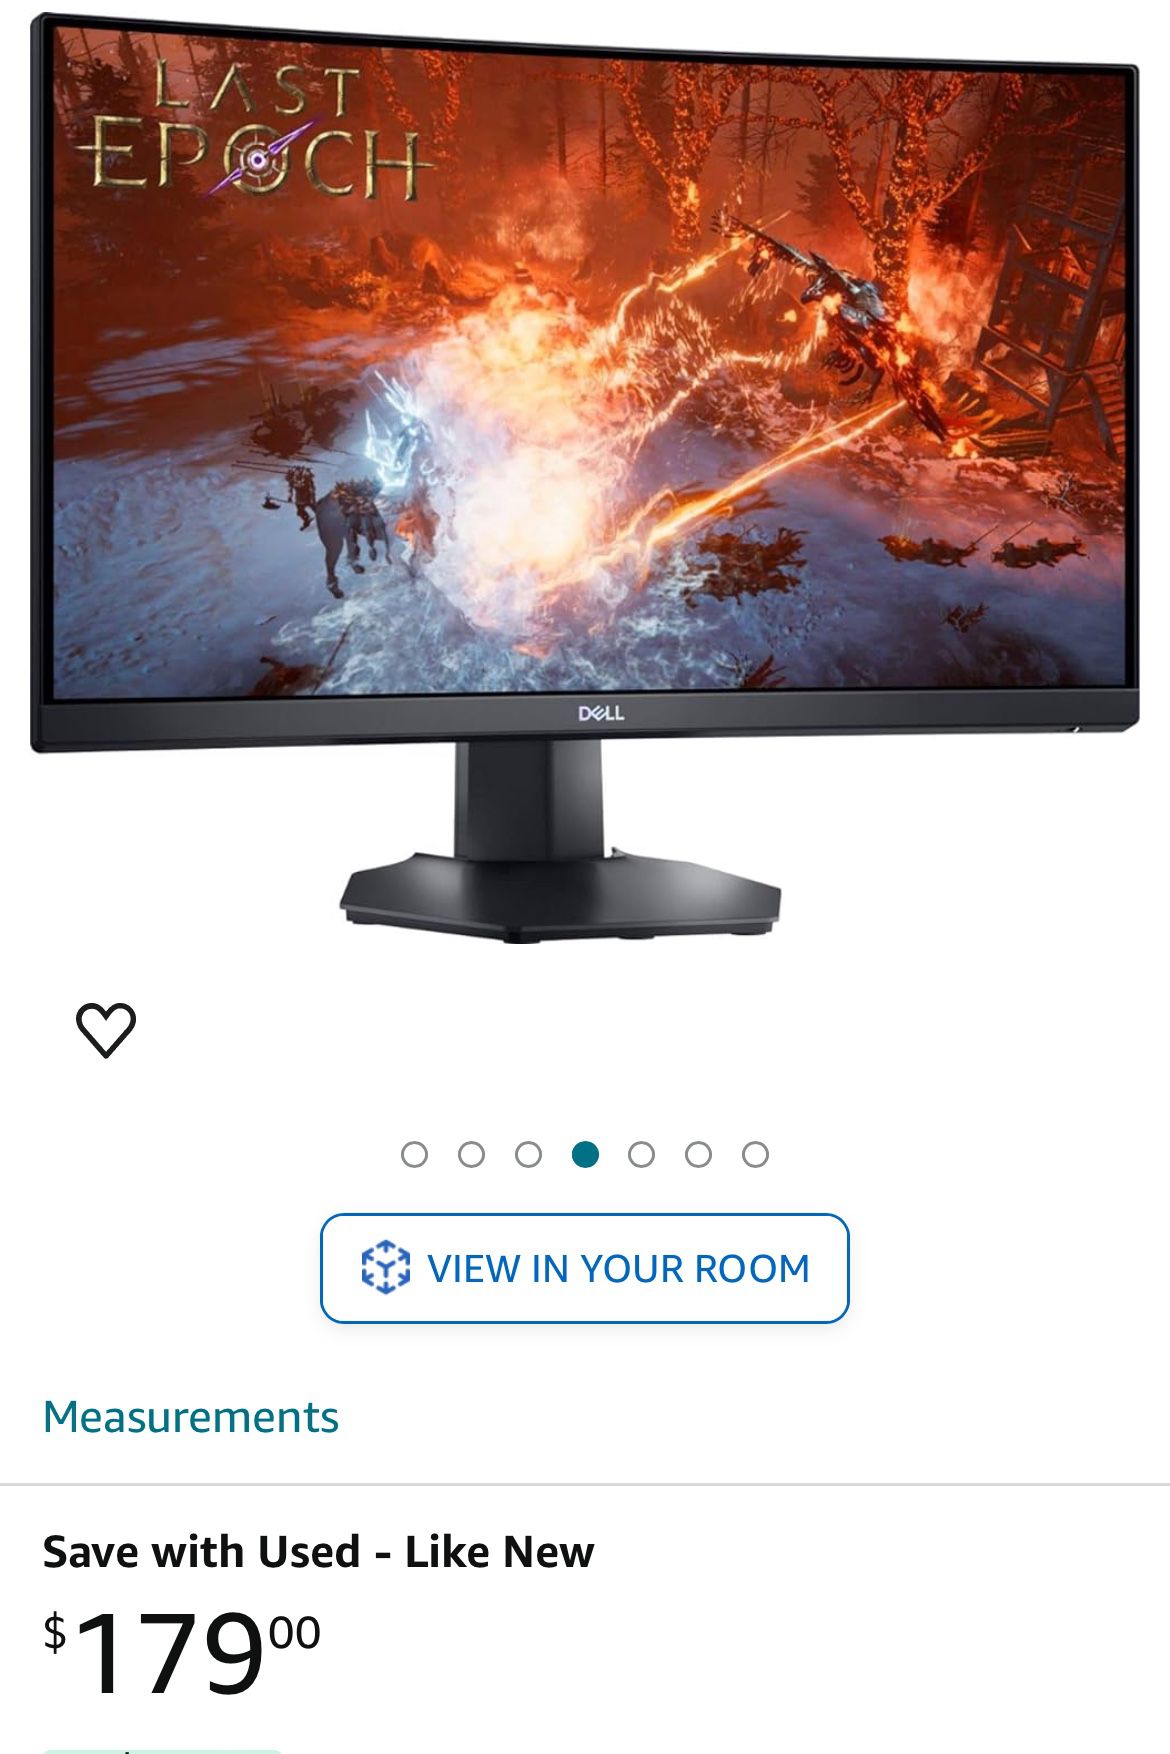 Dell - 24" VA LED FHD Curved Gaming Monitor